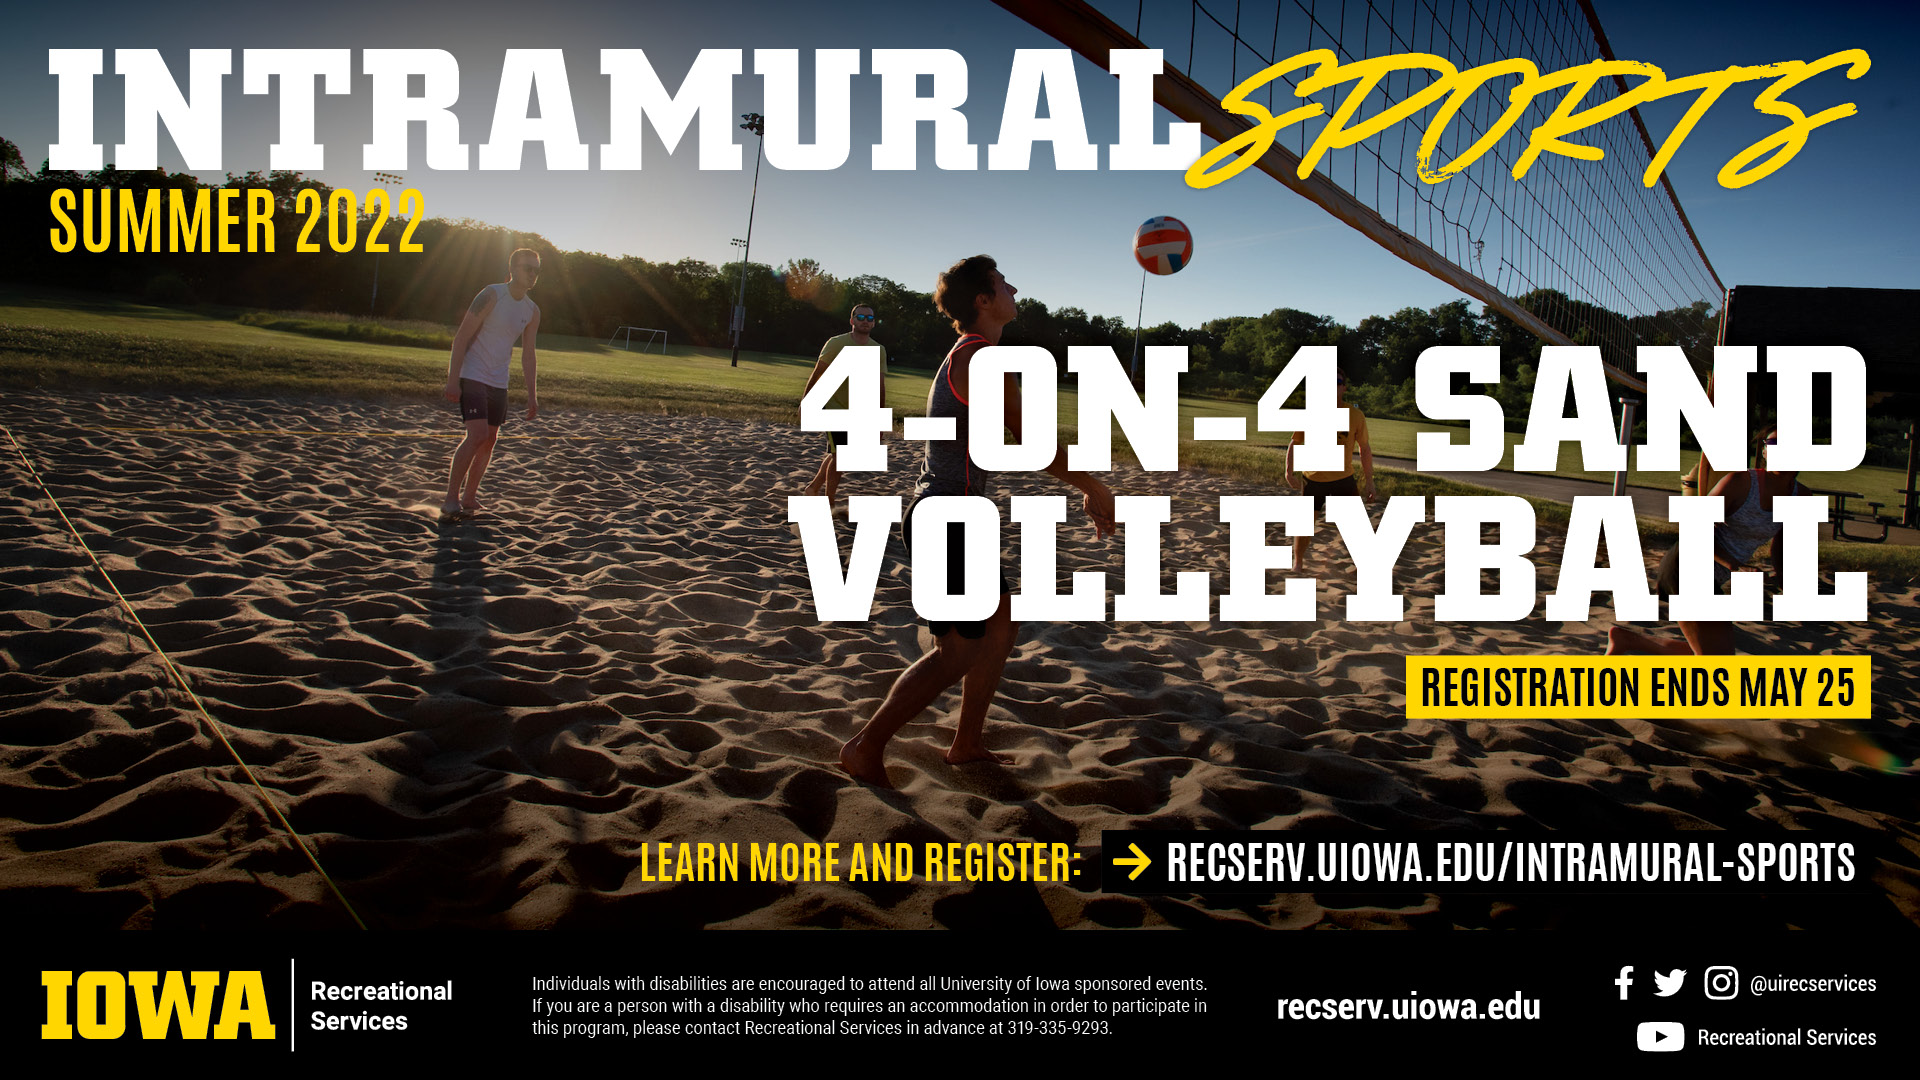 Summer 2022 Intramural Sports 4 on 4 Sand Volleyball. Registration ends May 25. Learn more and register: recserv.uiowa.edu/intramural-sports